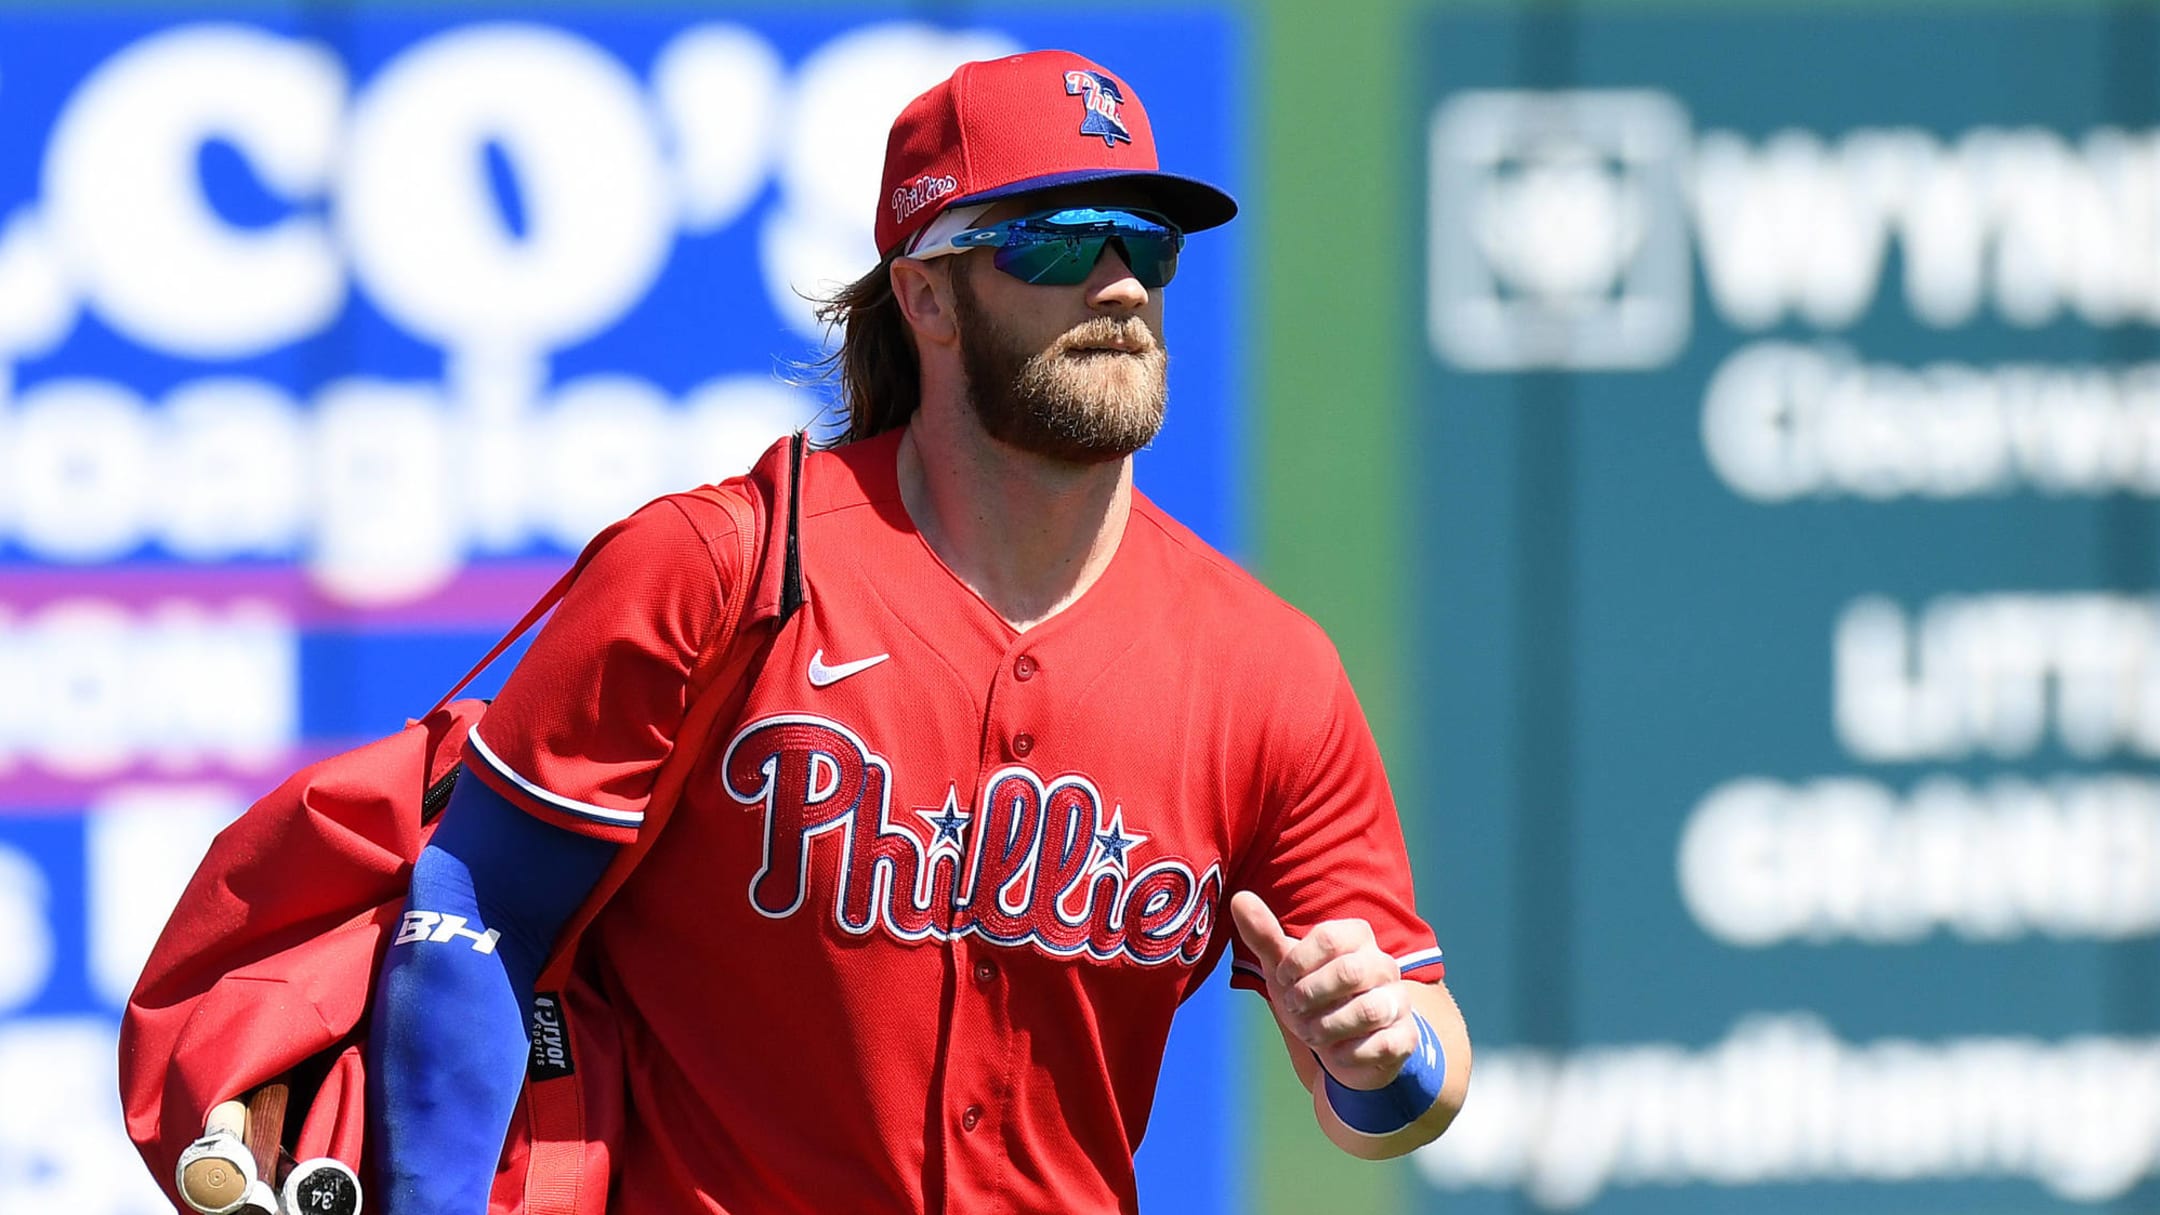 Bryce Harper jokes about interest in joining Eagles if MLB season